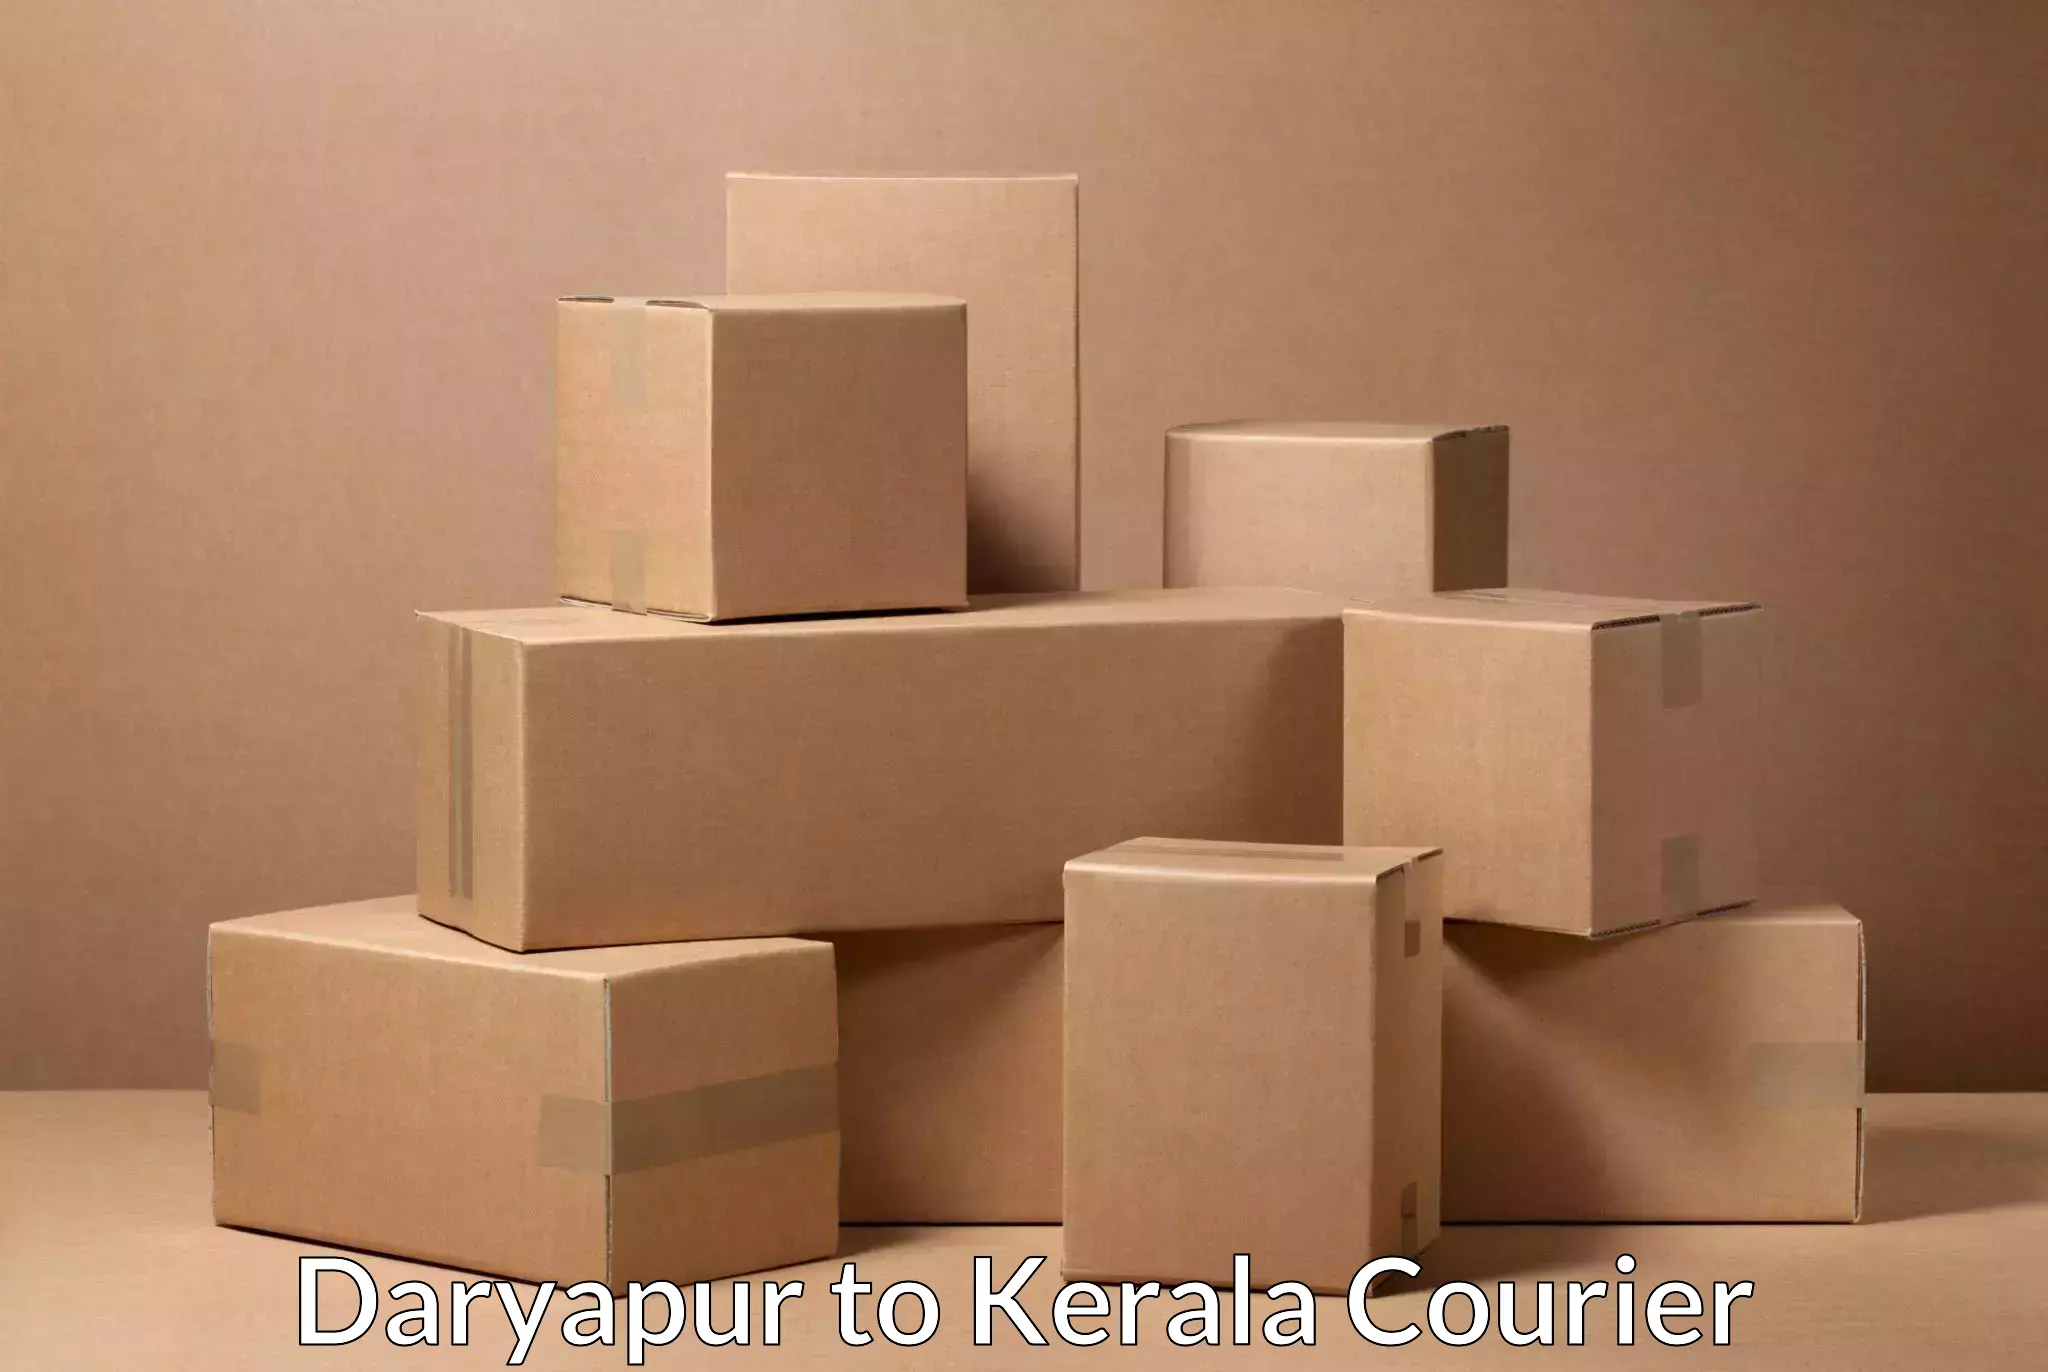 Tailored shipping services Daryapur to Cochin University of Science and Technology